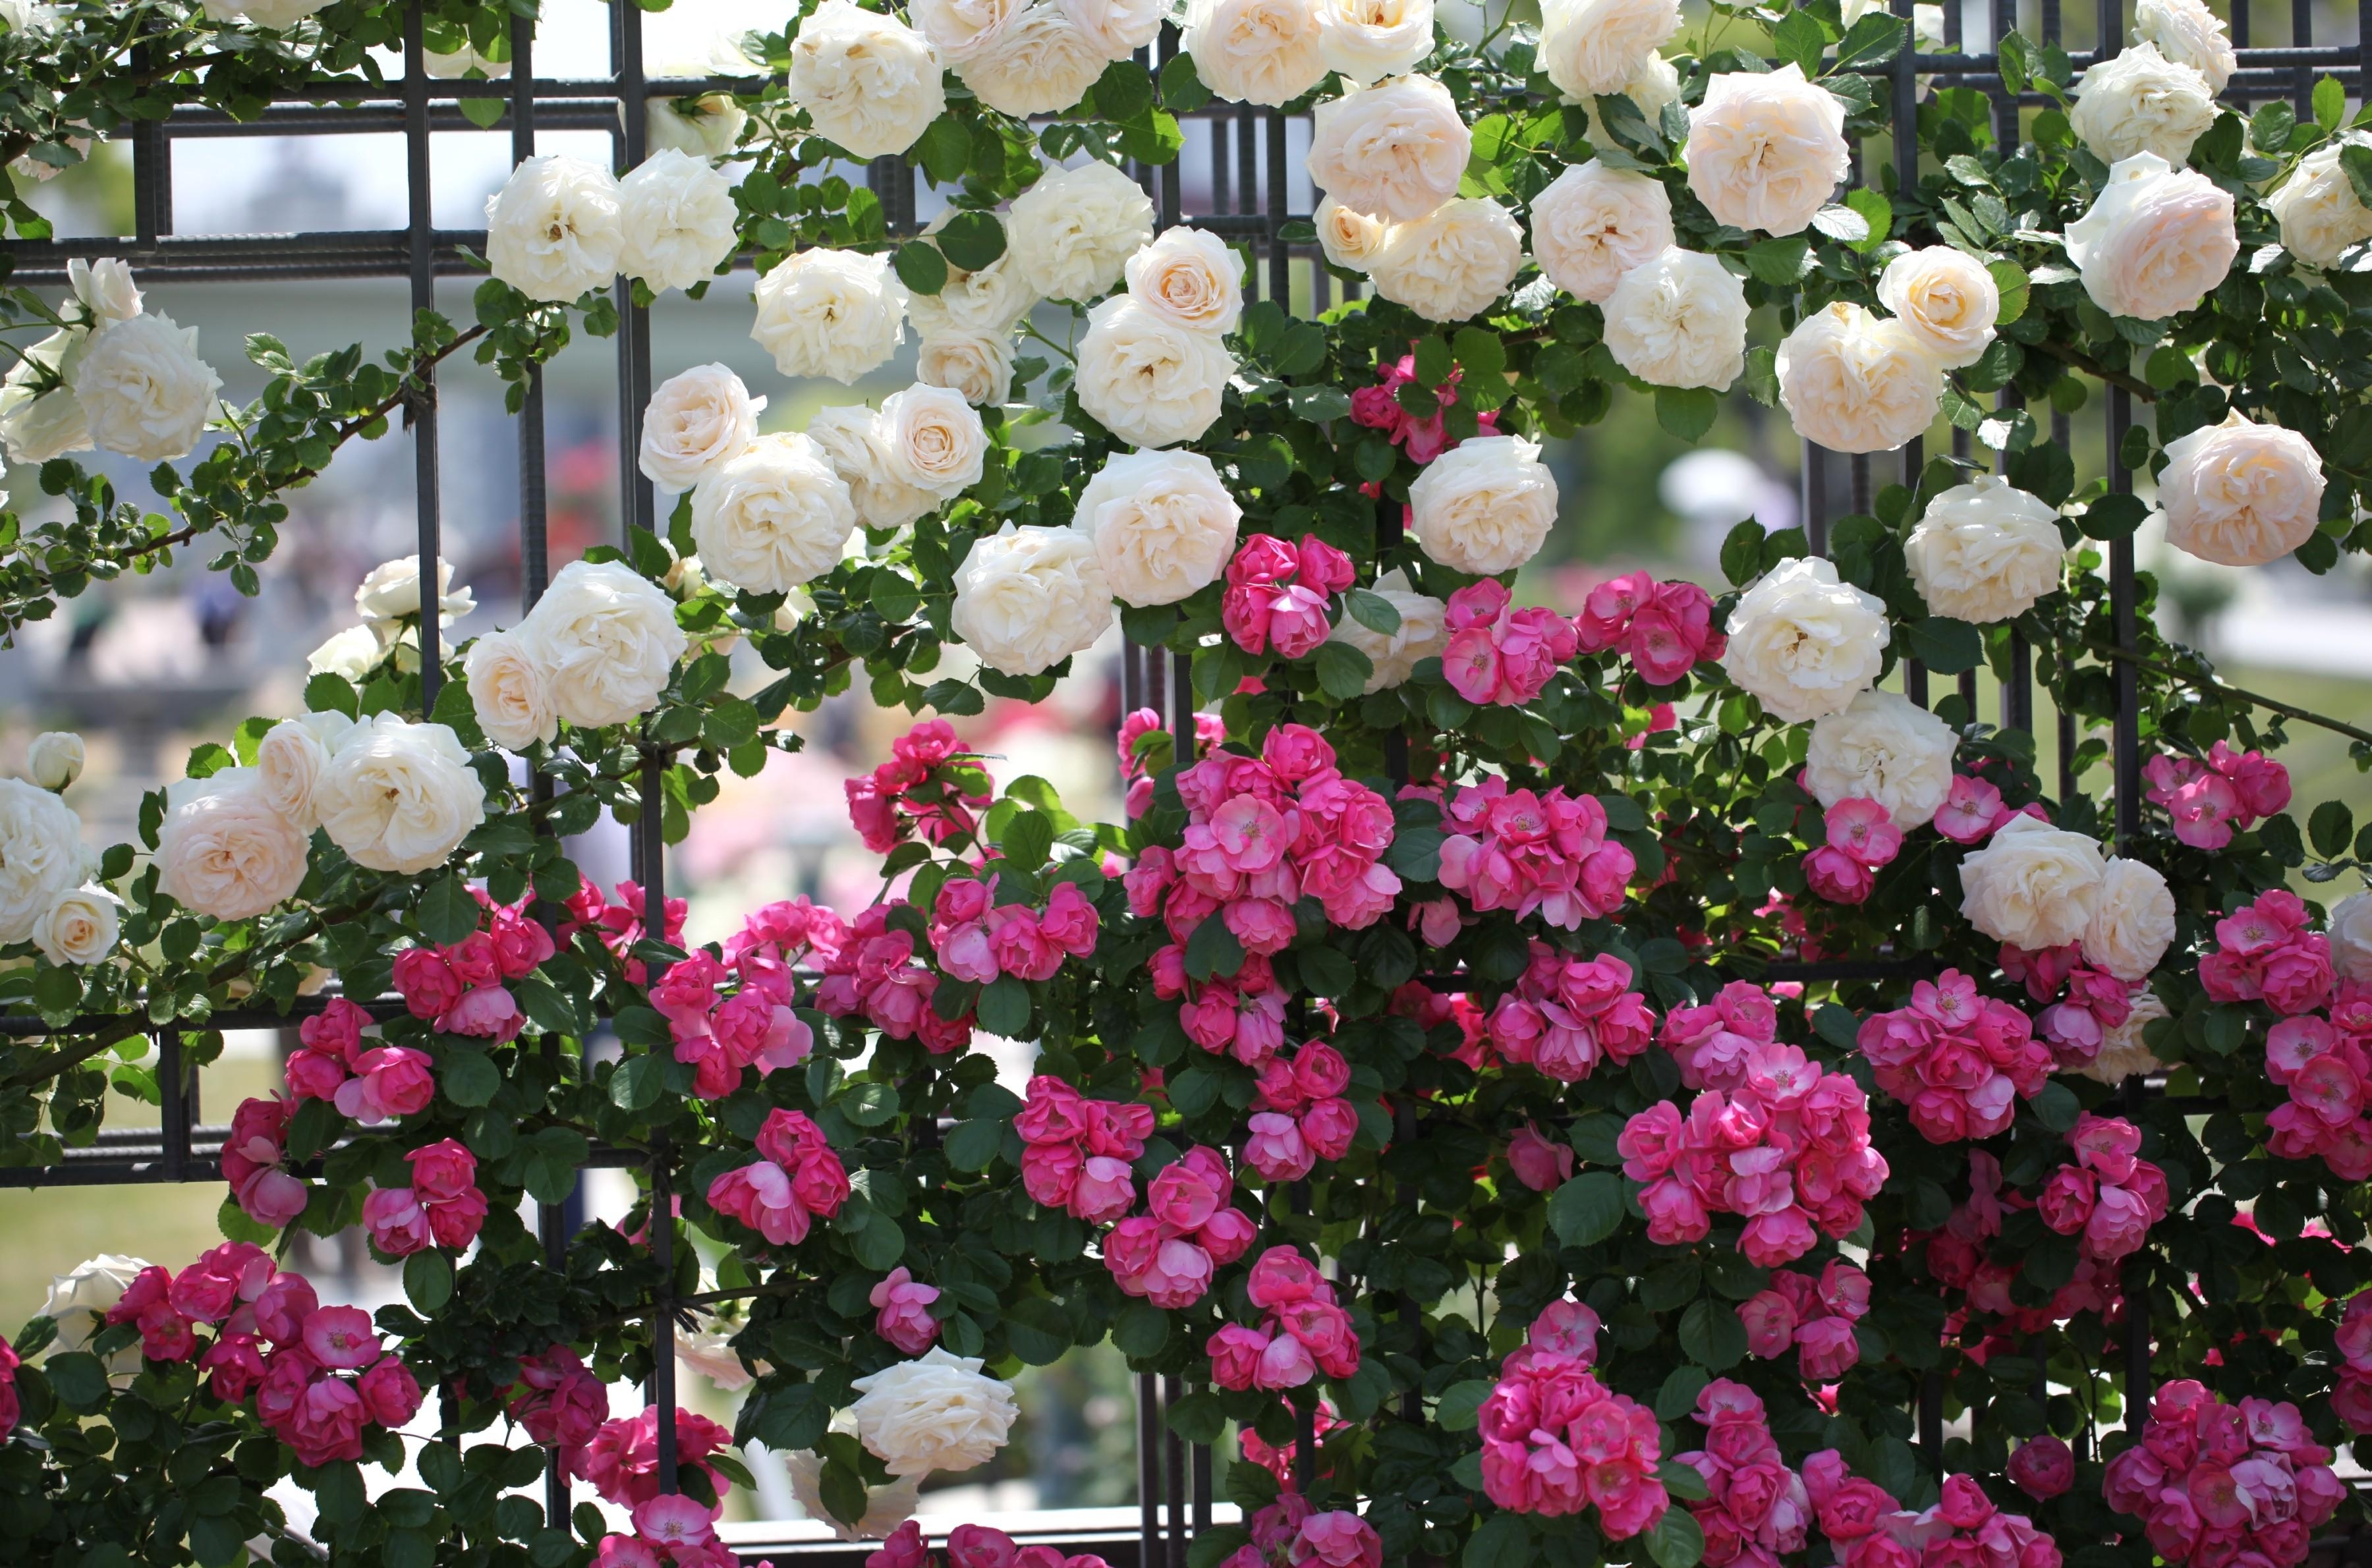 it's beautiful, flowers, roses, greens, fence, handsomely, different 1080p